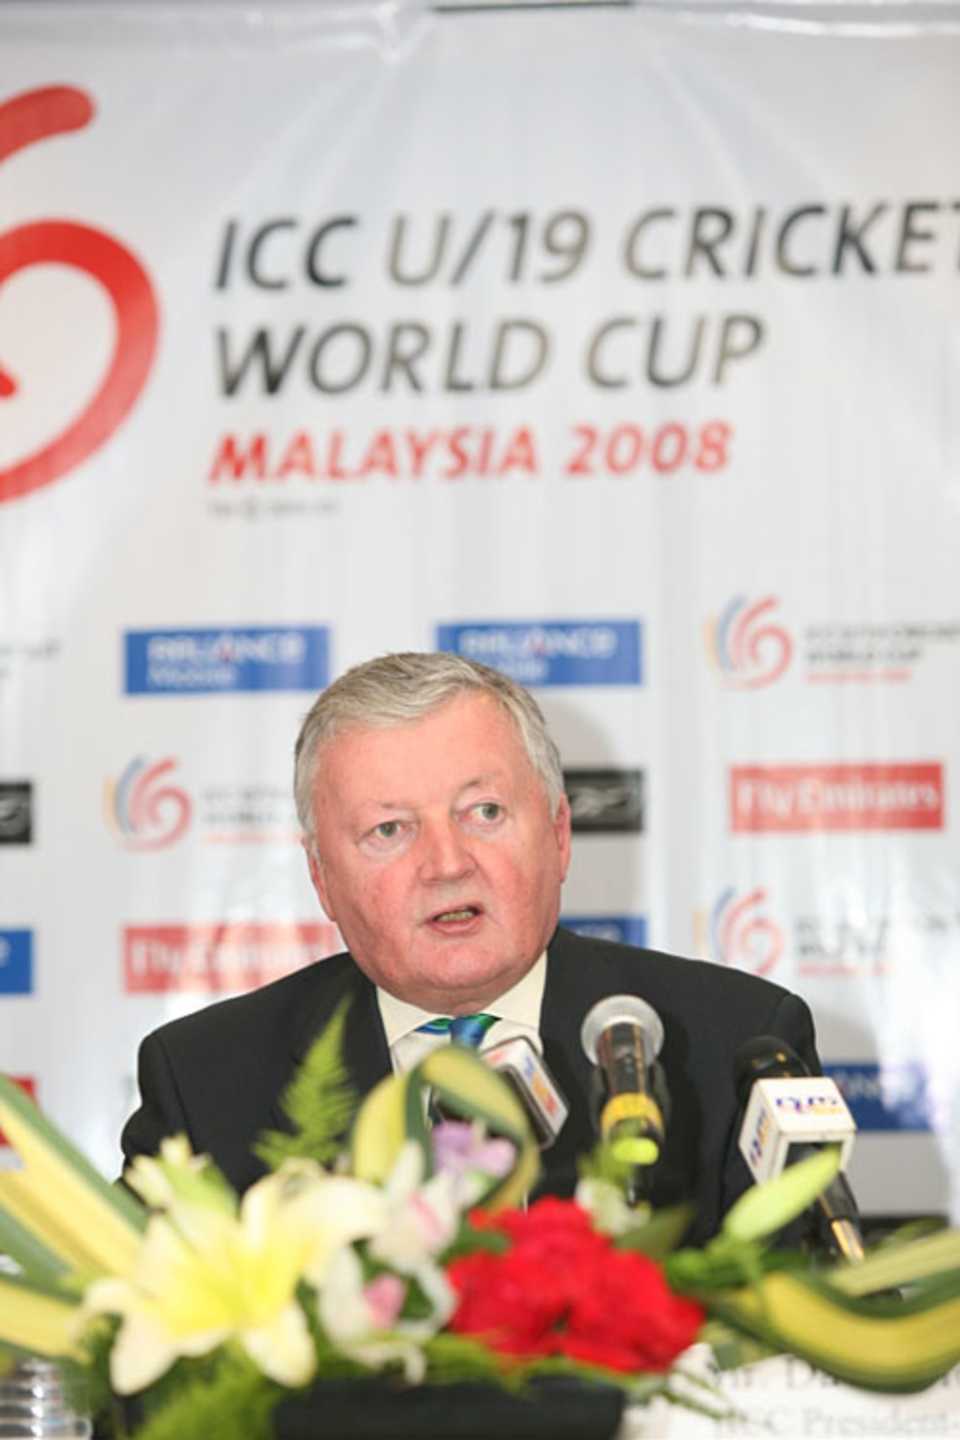 David Morgan officially launches the 2008 Under-19 World Cup